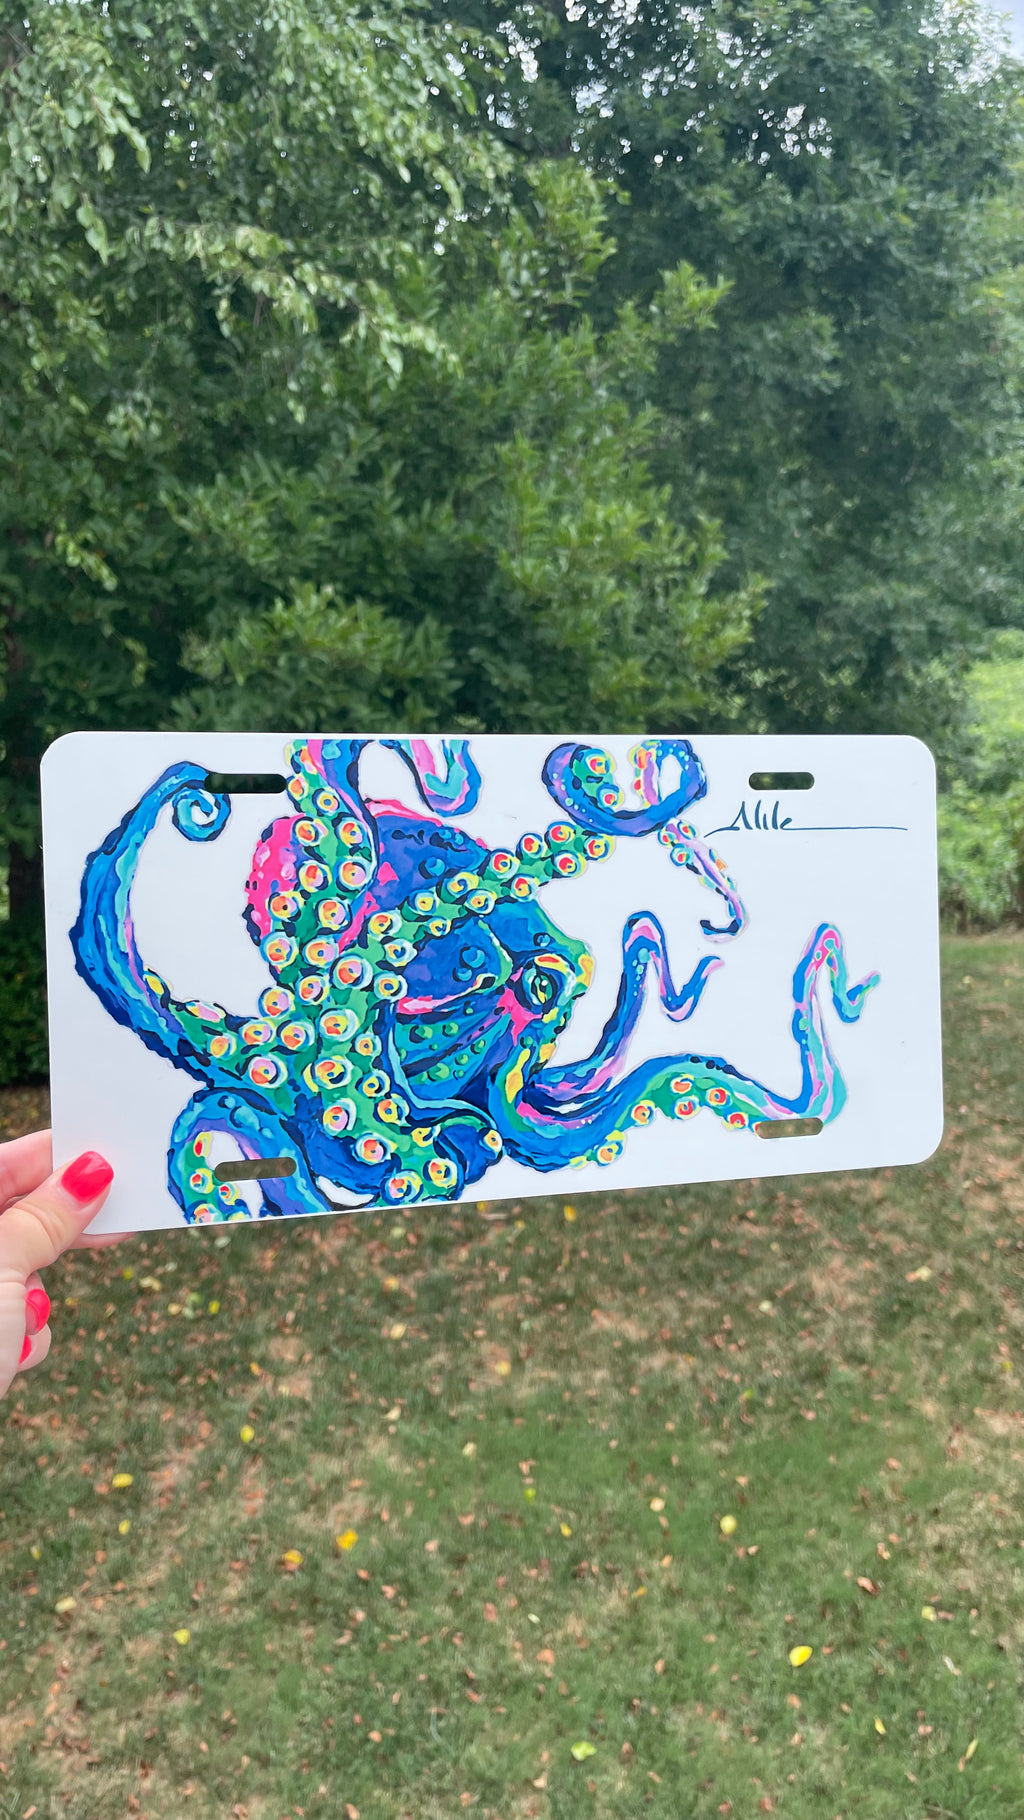 “SquibSea” Octopus License Plate